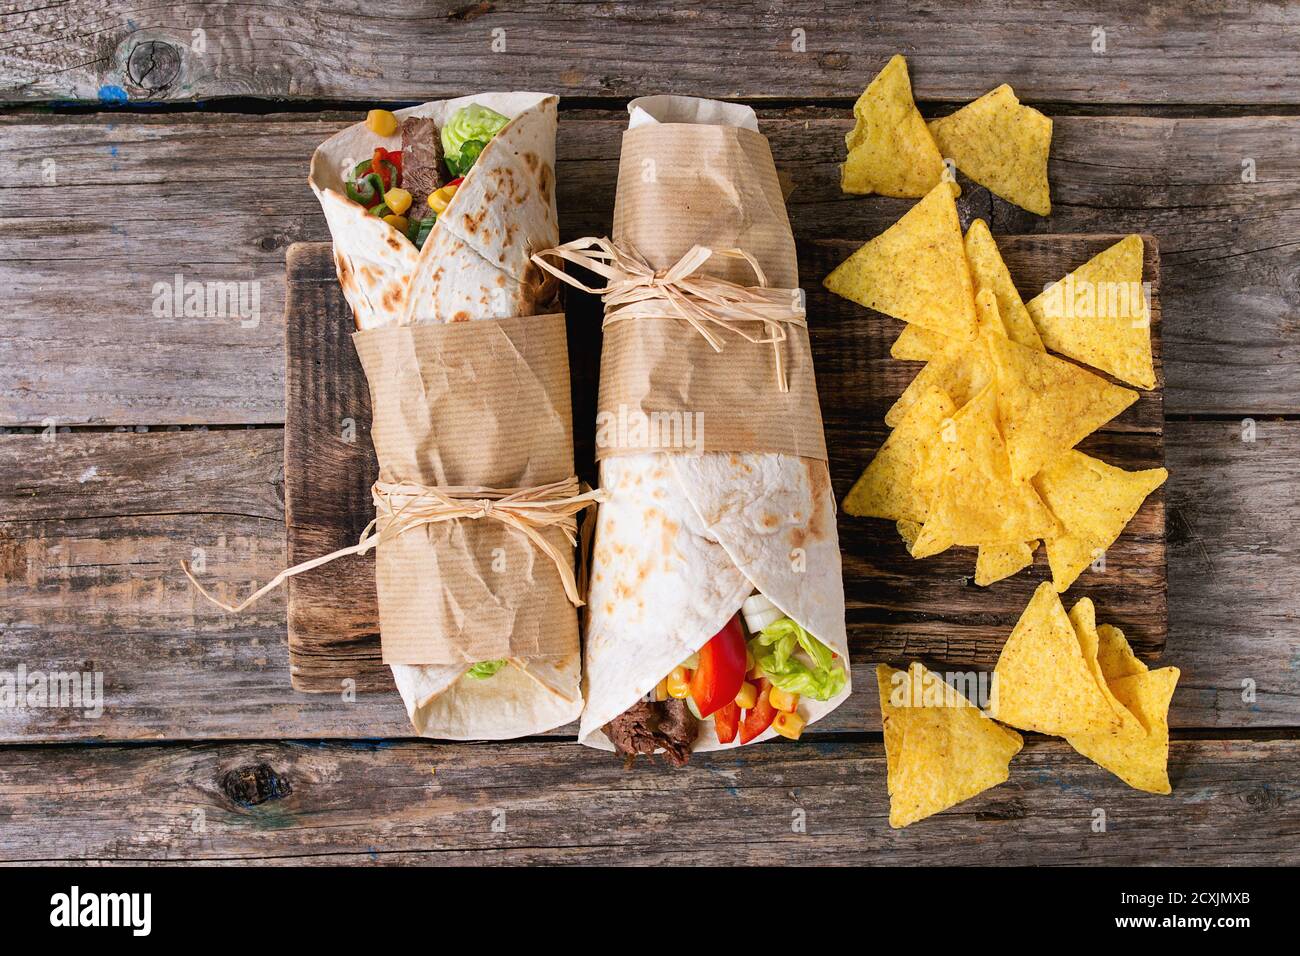 Mexican style dinner. Two papered tortillas burrito with beef and vegetables served with nachos chips over old wooden background. Flat lay Stock Photo